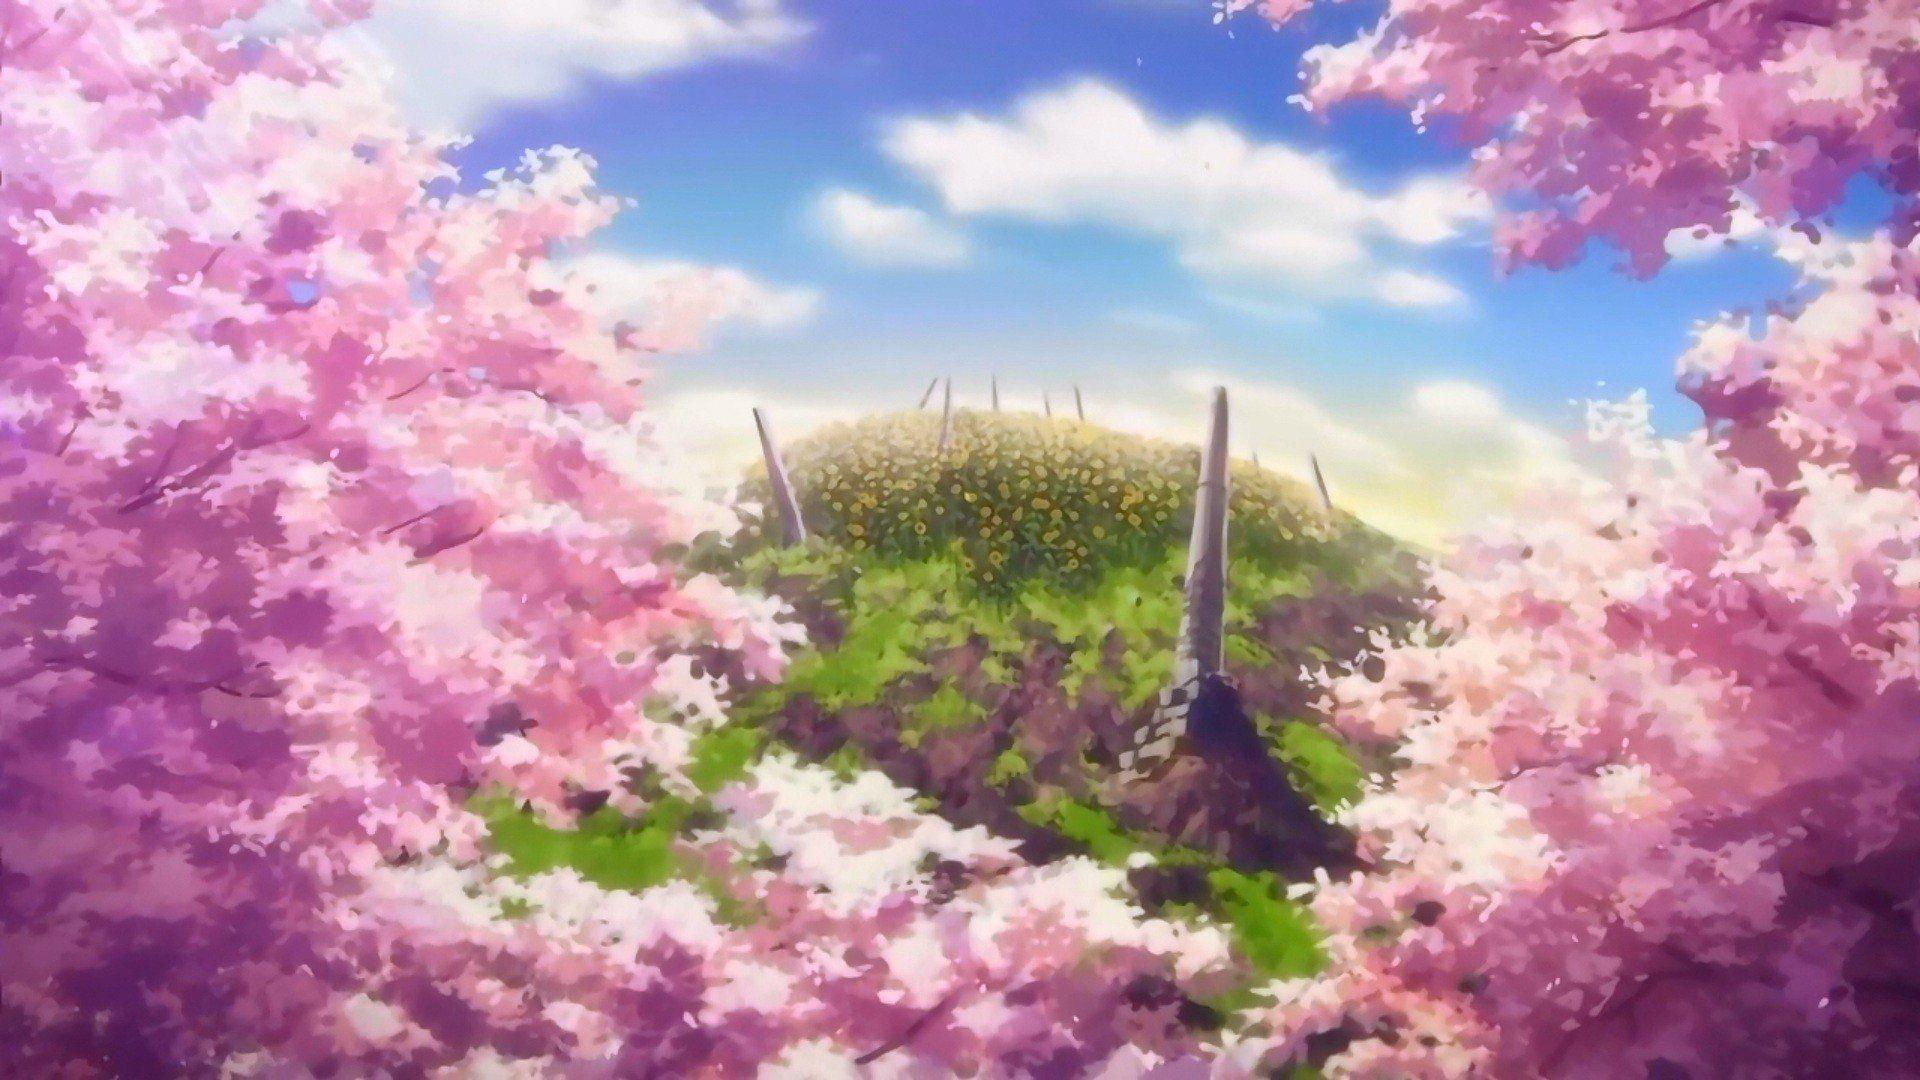 Anime Cherry Blossom Wallpaper Outlet GET 53 OFF wwwislandcrematoriumie